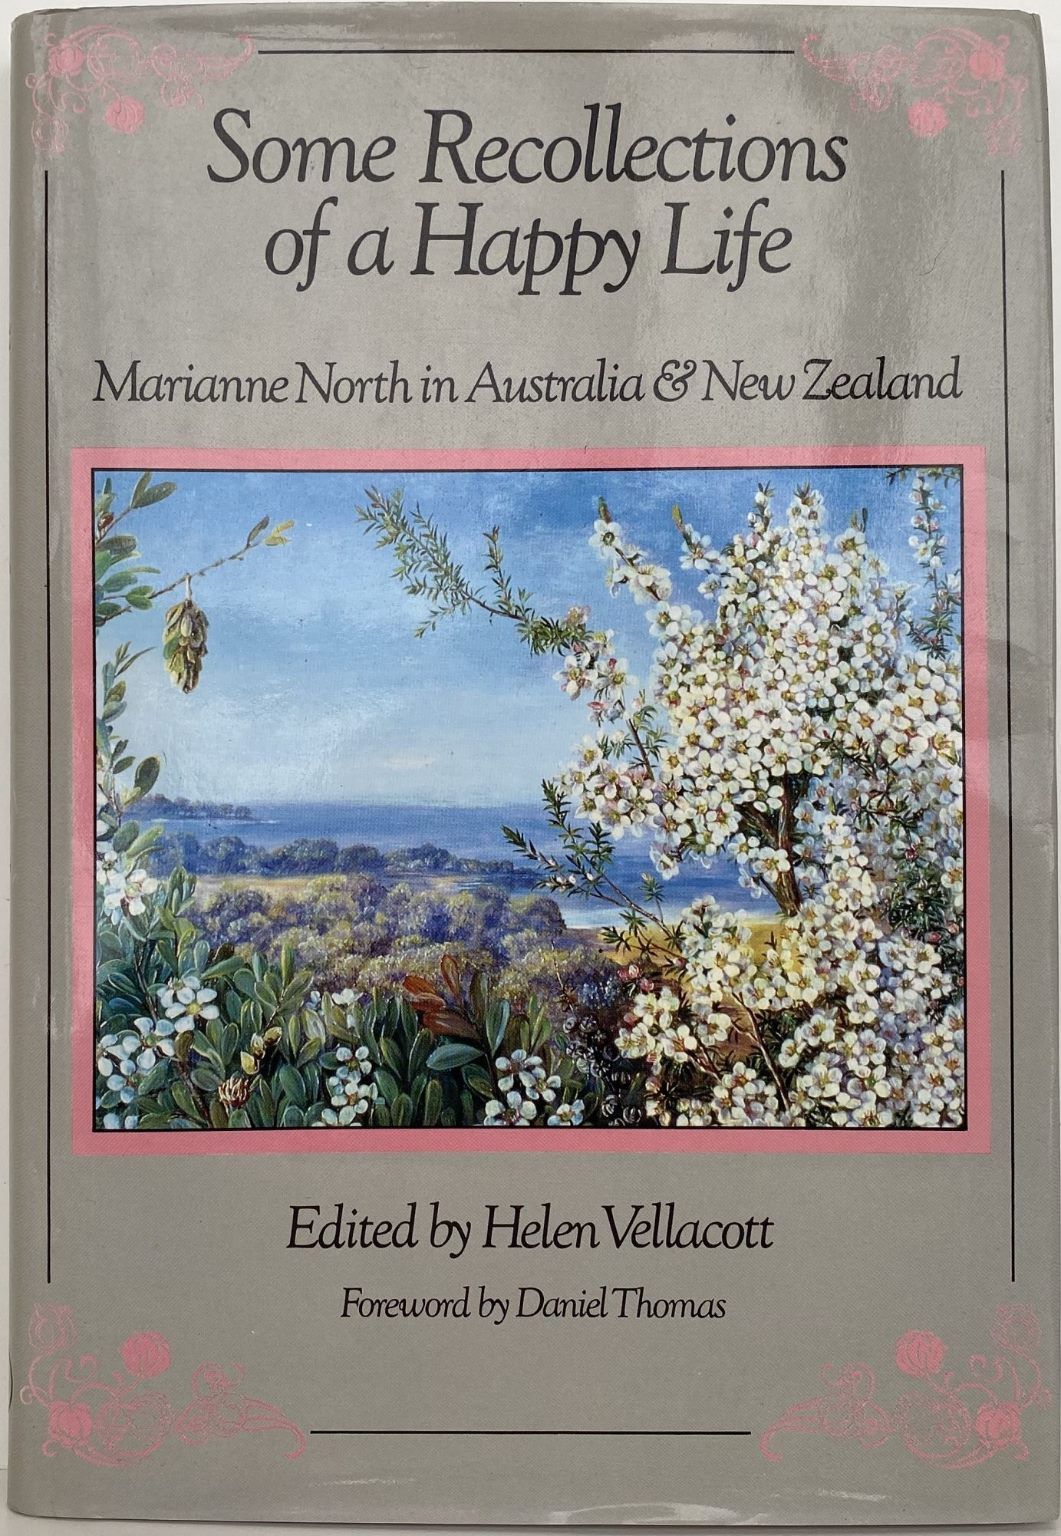 SOME RECOLLECTIONS OF A HAPPY LIFE: Marianne North in Australia and New Zealand